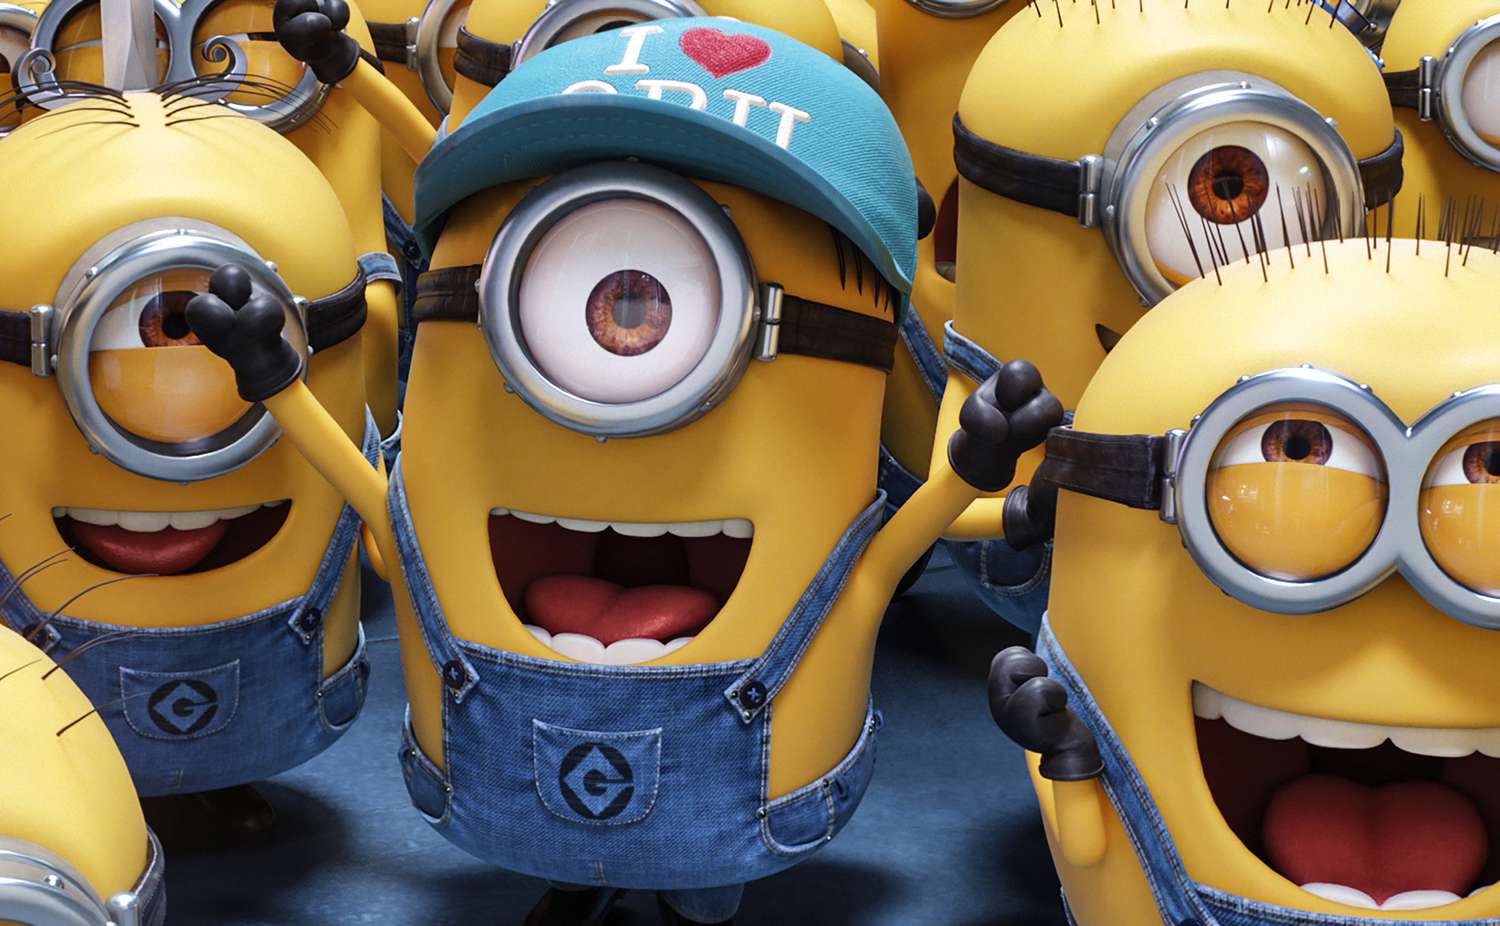 Minions The Rise Of Gru Postponed From July Release As French Animation Studio Is Forced To Close